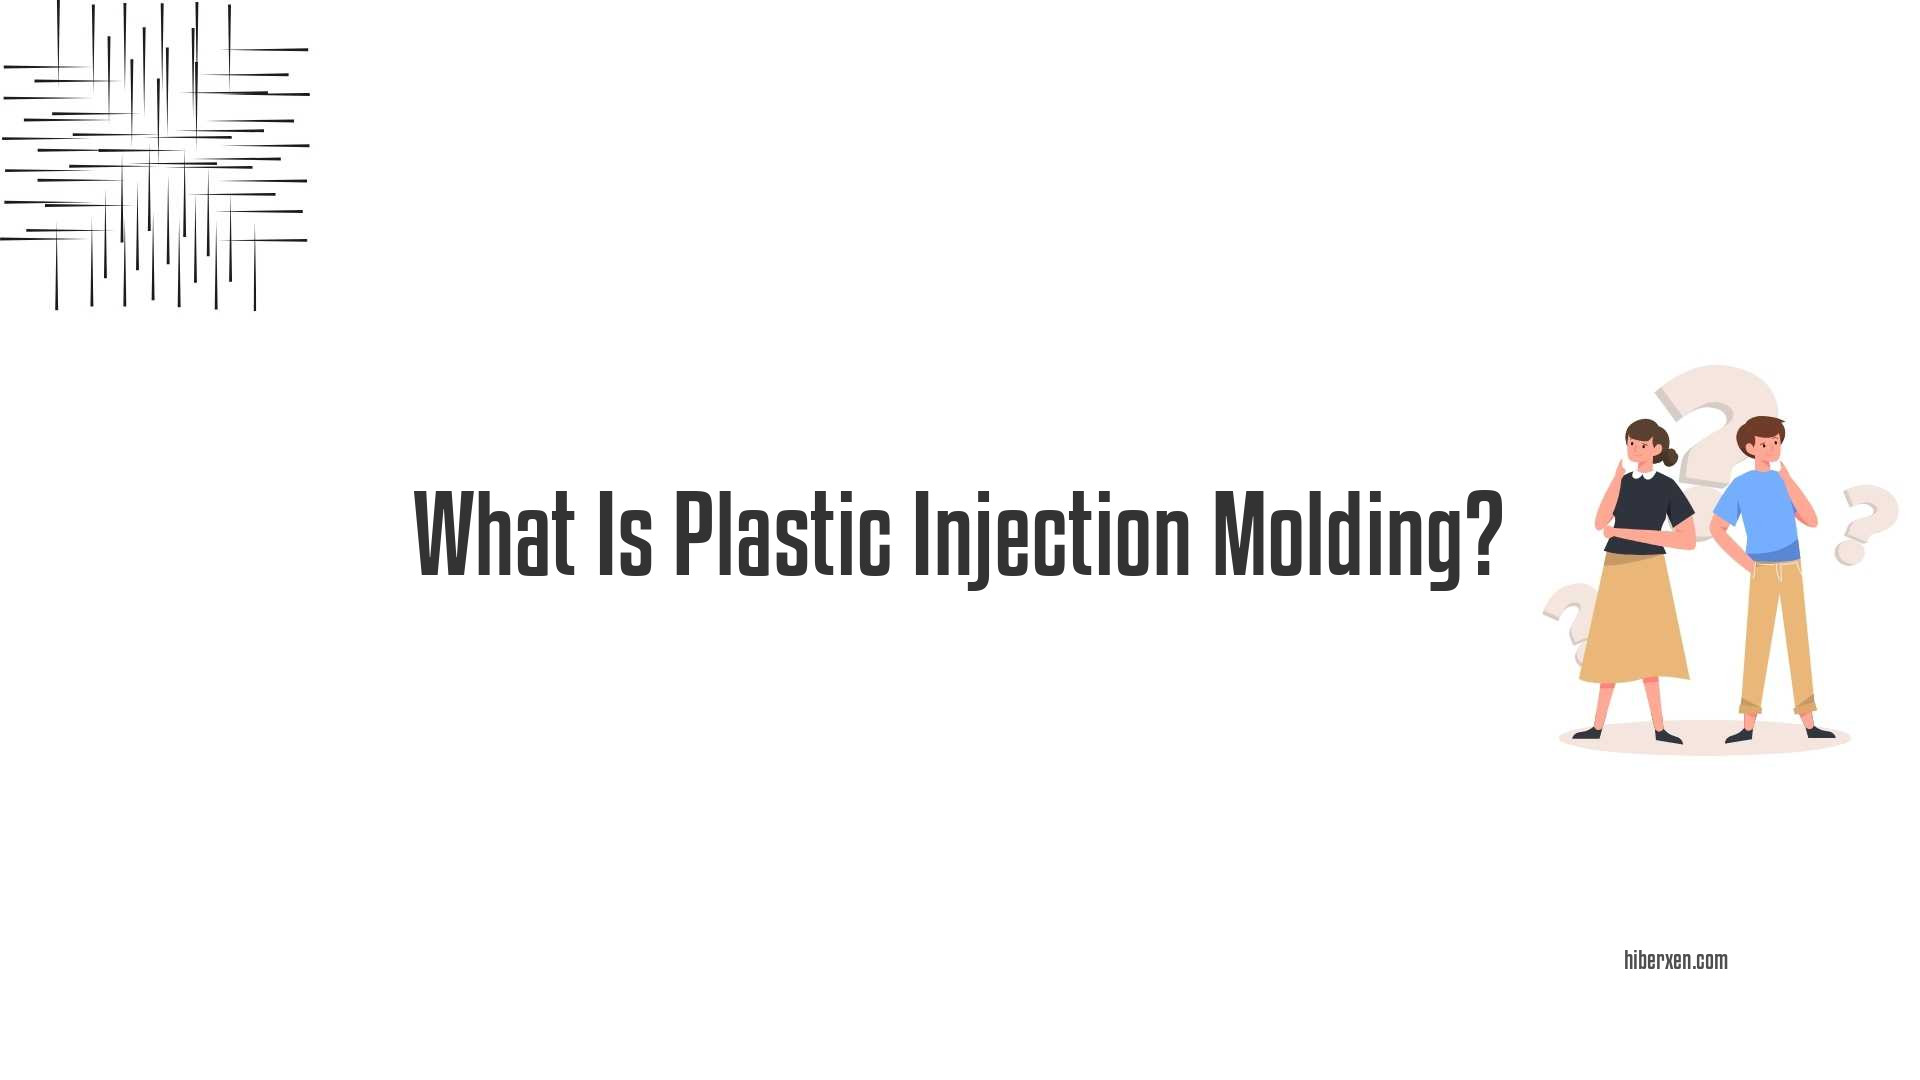 What Is Plastic Injection Molding?